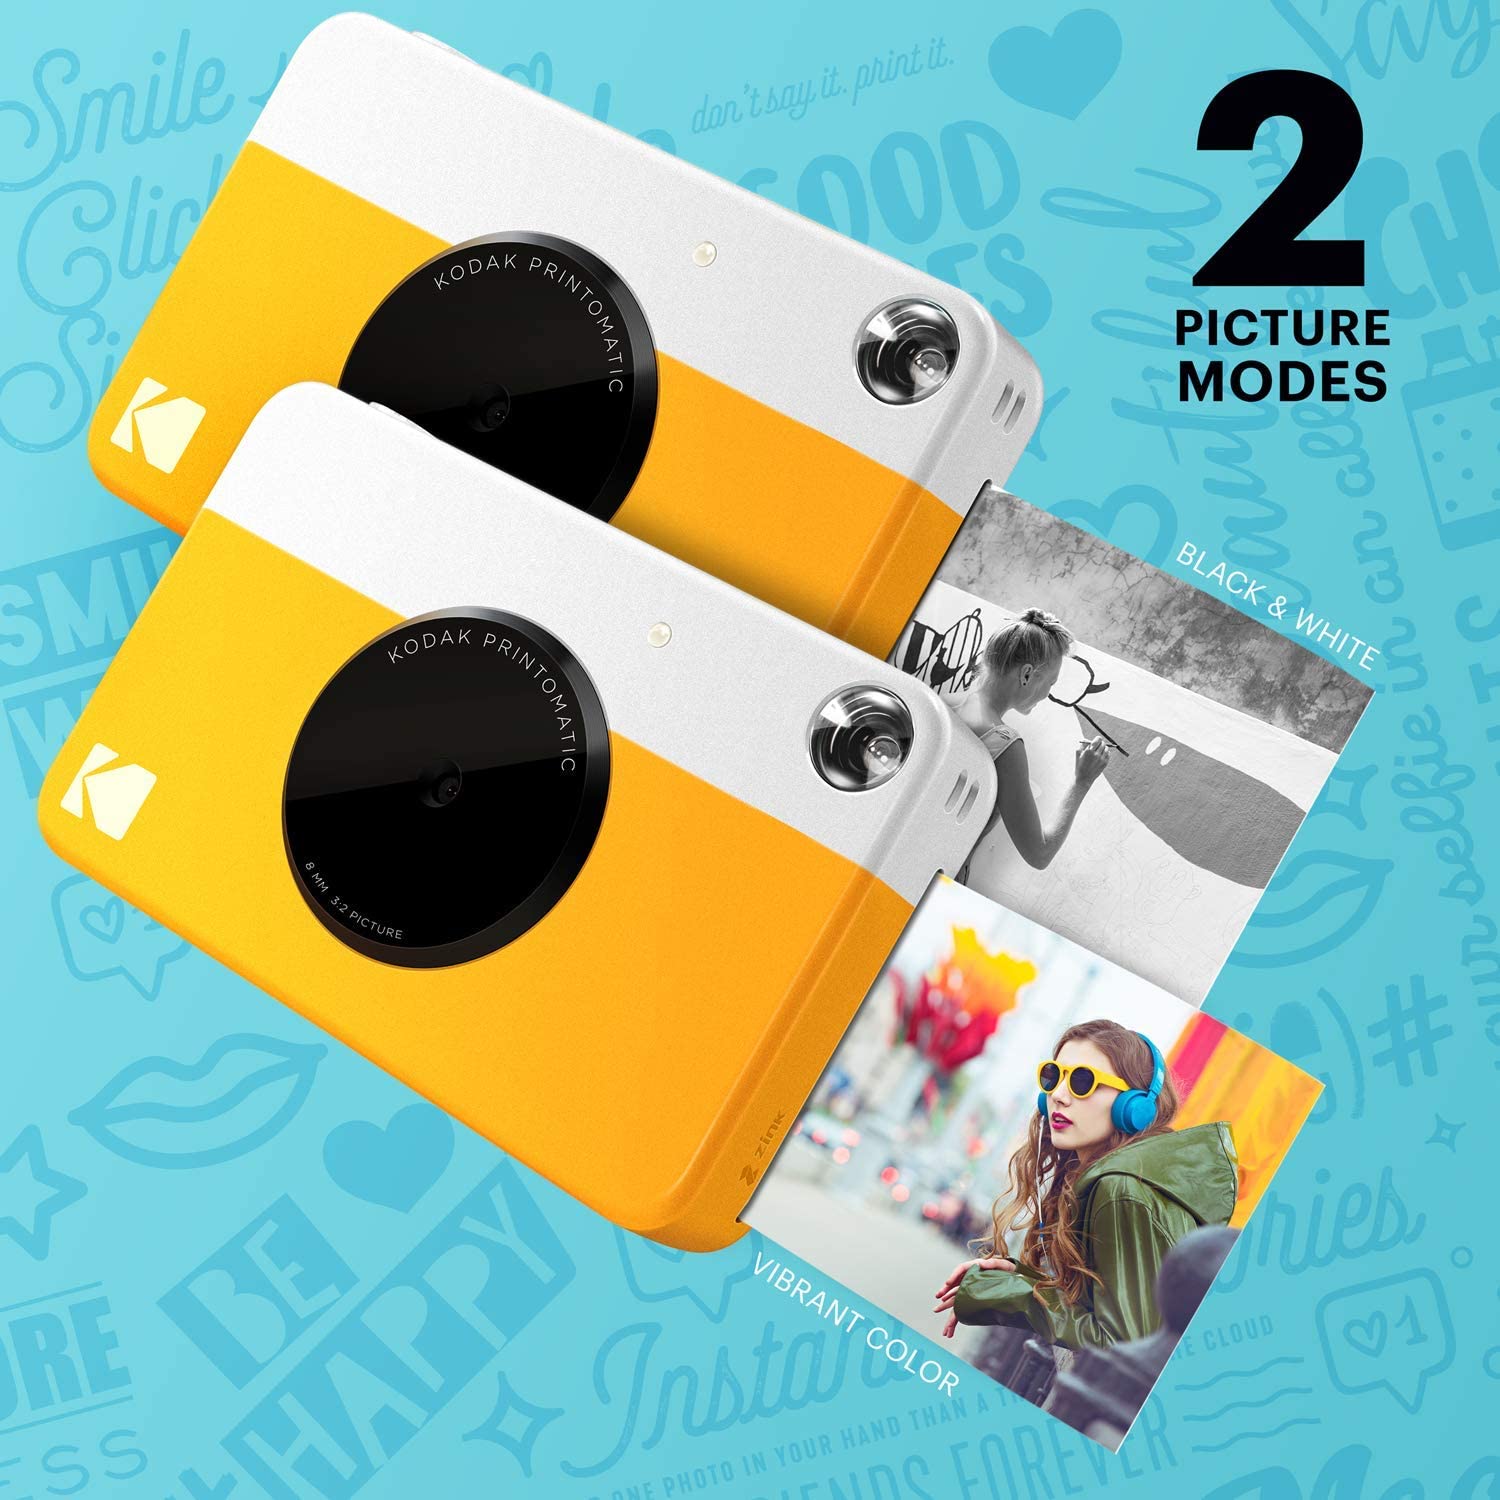 71Wu1U8Rfl. Ac Sl1500 &Lt;B&Gt;Kodak Printomatic Instant Print Camera&Lt;/B&Gt; Capture And Print All The Fun In An Instant. &Lt;B&Gt;All-In-One Photography&Lt;/B&Gt; The 10-Megapixel, Point-And-Shoot Printomatic Camera Instantly And Automatically Prints Color Or Black And White Photos Directly From The Camera Body, Making It The Ideal All-In-One Solution For Capturing And Sharing Vibrant Prints Instantly. &Lt;B&Gt;Fast, Fun And Easy To Use&Lt;/B&Gt; The Camera’s Speed Allows You To Shoot A New Photo While Printing The Previous Shot. Available In Yellow Or Grey, It Also Comes Equipped With A Light Sensor That Will Automatically Turn On The Flash In Low-Light Settings. &Lt;B&Gt;On-The-Spot Printing&Lt;/B&Gt; The Camera Produces 2 X 3-In. Prints On Kodak Zink Photo Paper. They Are Water-Resistant, Tear Resistant And Adhesive-Backed. No Computer Connection, Ink Cartridges Or Toners Are Needed. Kodak Kodak Zink Photo Paper For Printomatic - 50 Pack